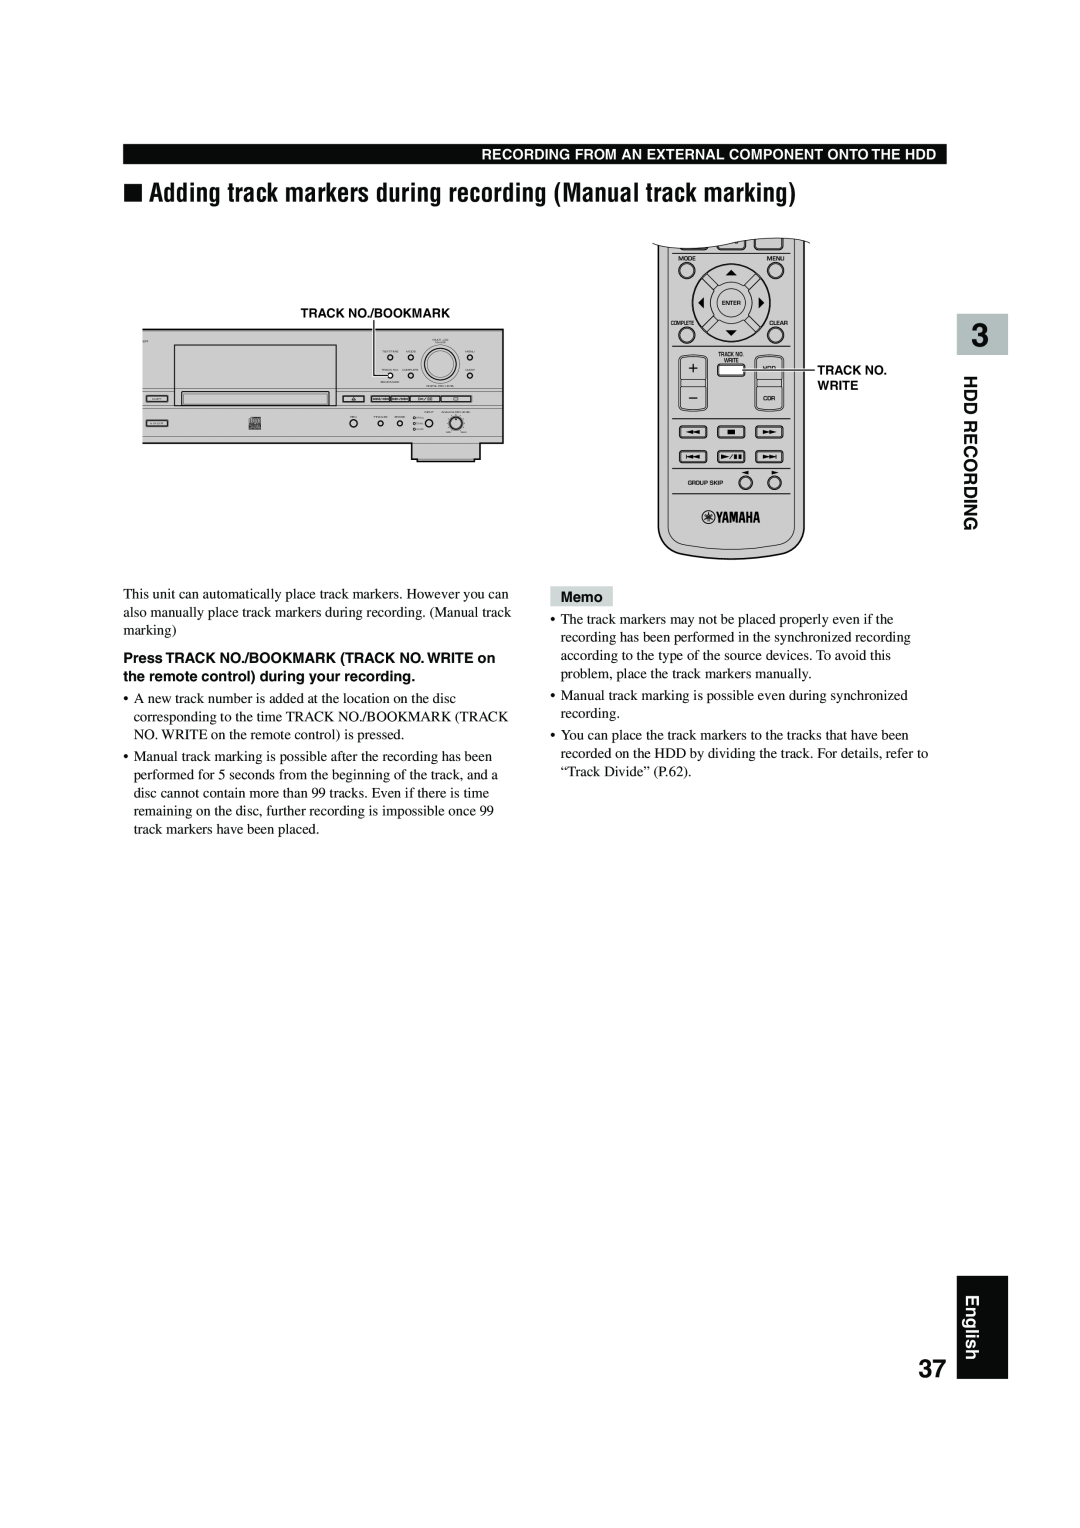 Yamaha CDR-HD 1500 owner manual English, Recording From An External Component Onto The Hdd, Memo 